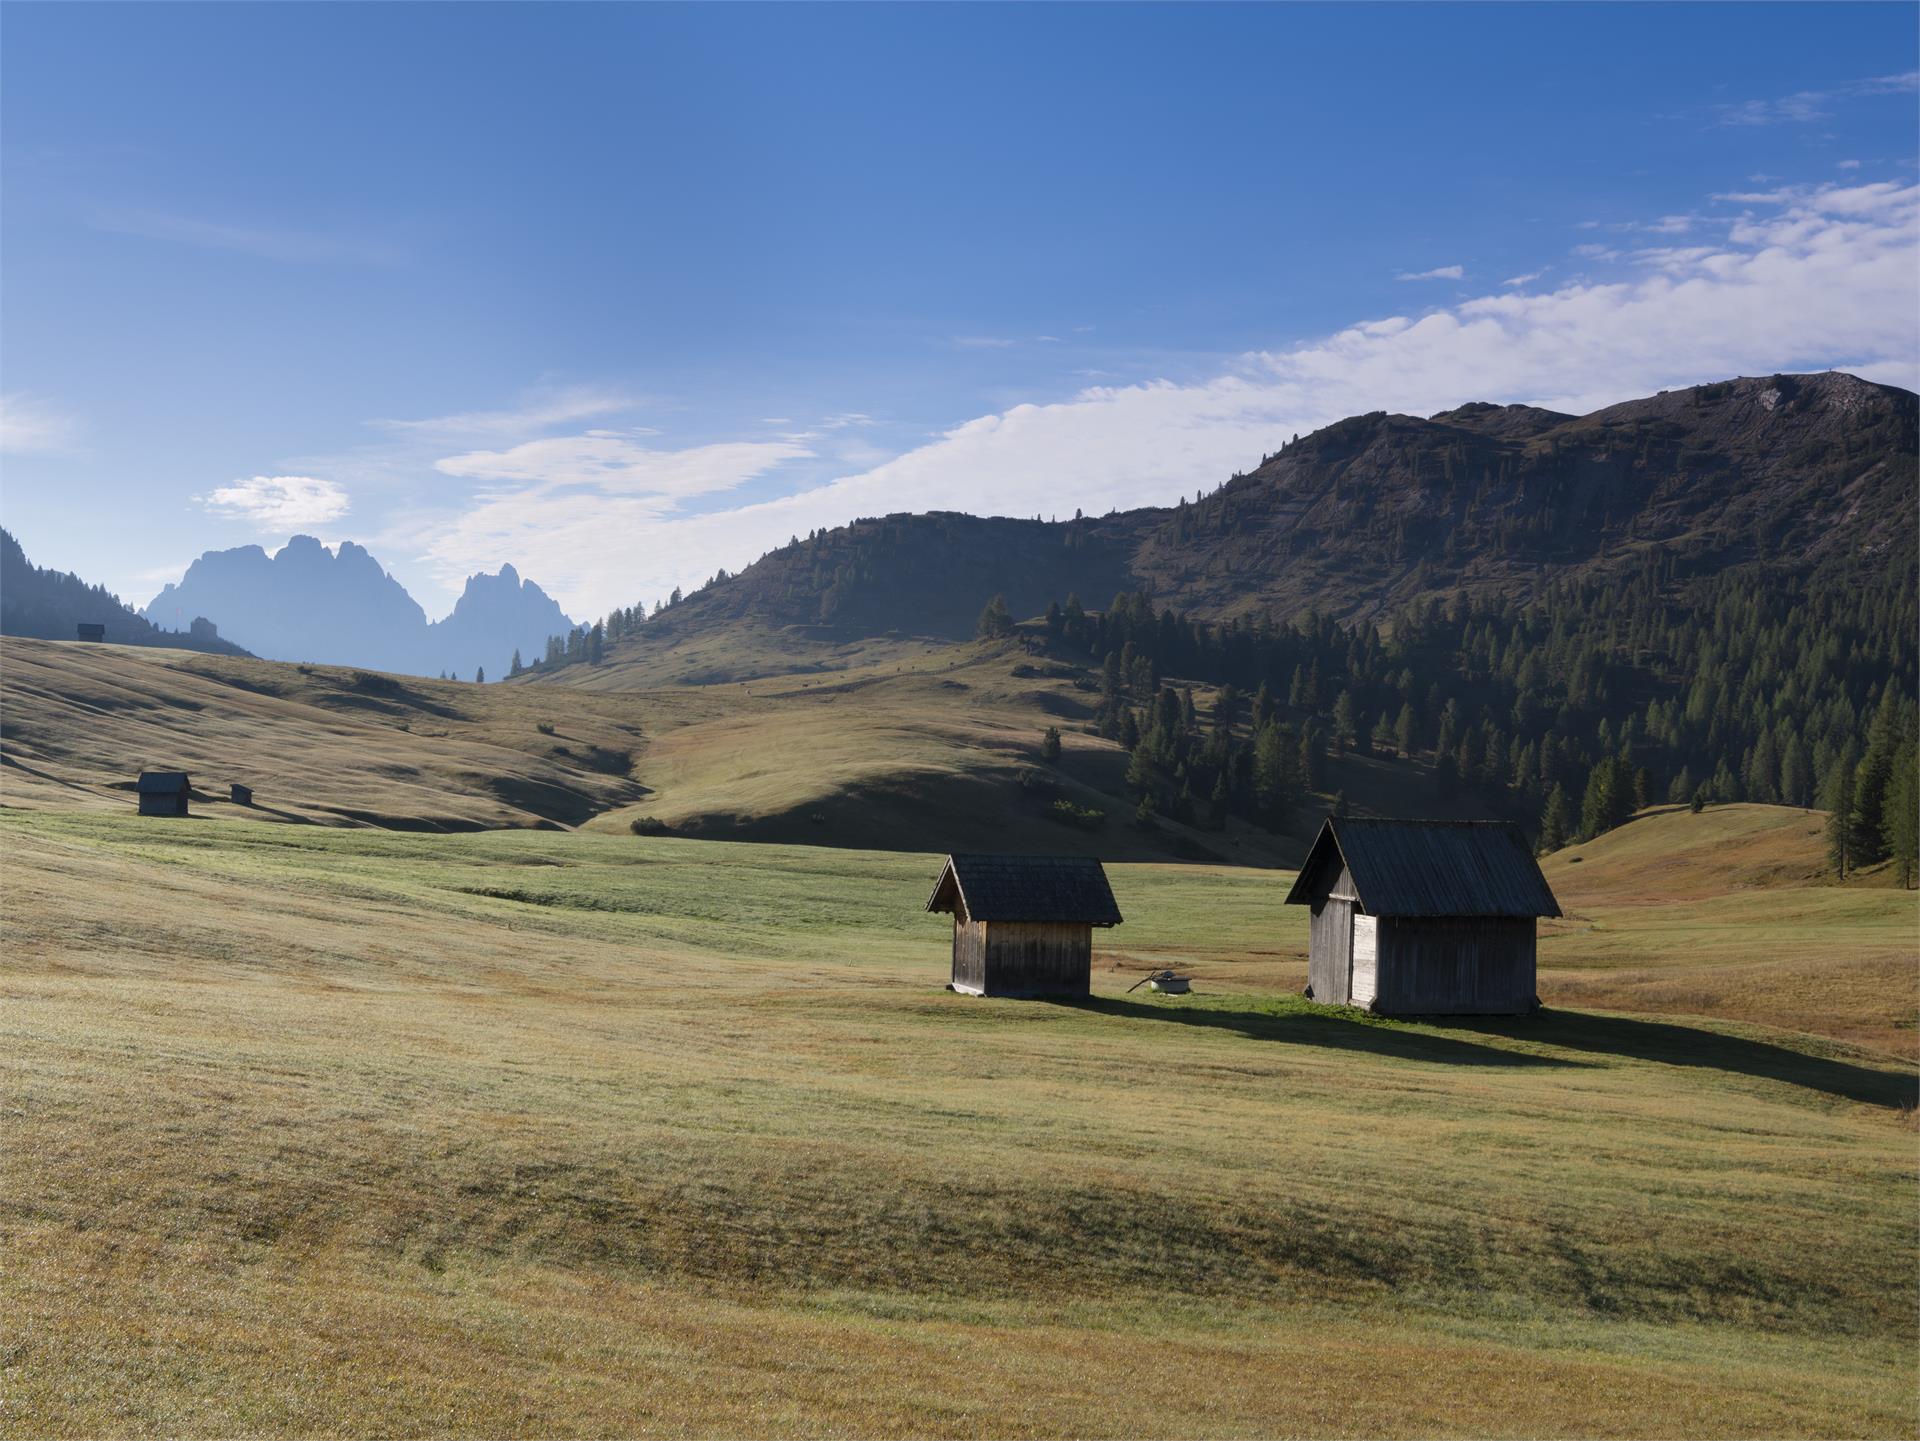 Summer hiking tour - Prato Piazza/Plätzwiese - Monte Specie/Strudelkopf -  Activities and Events in South Tyrol